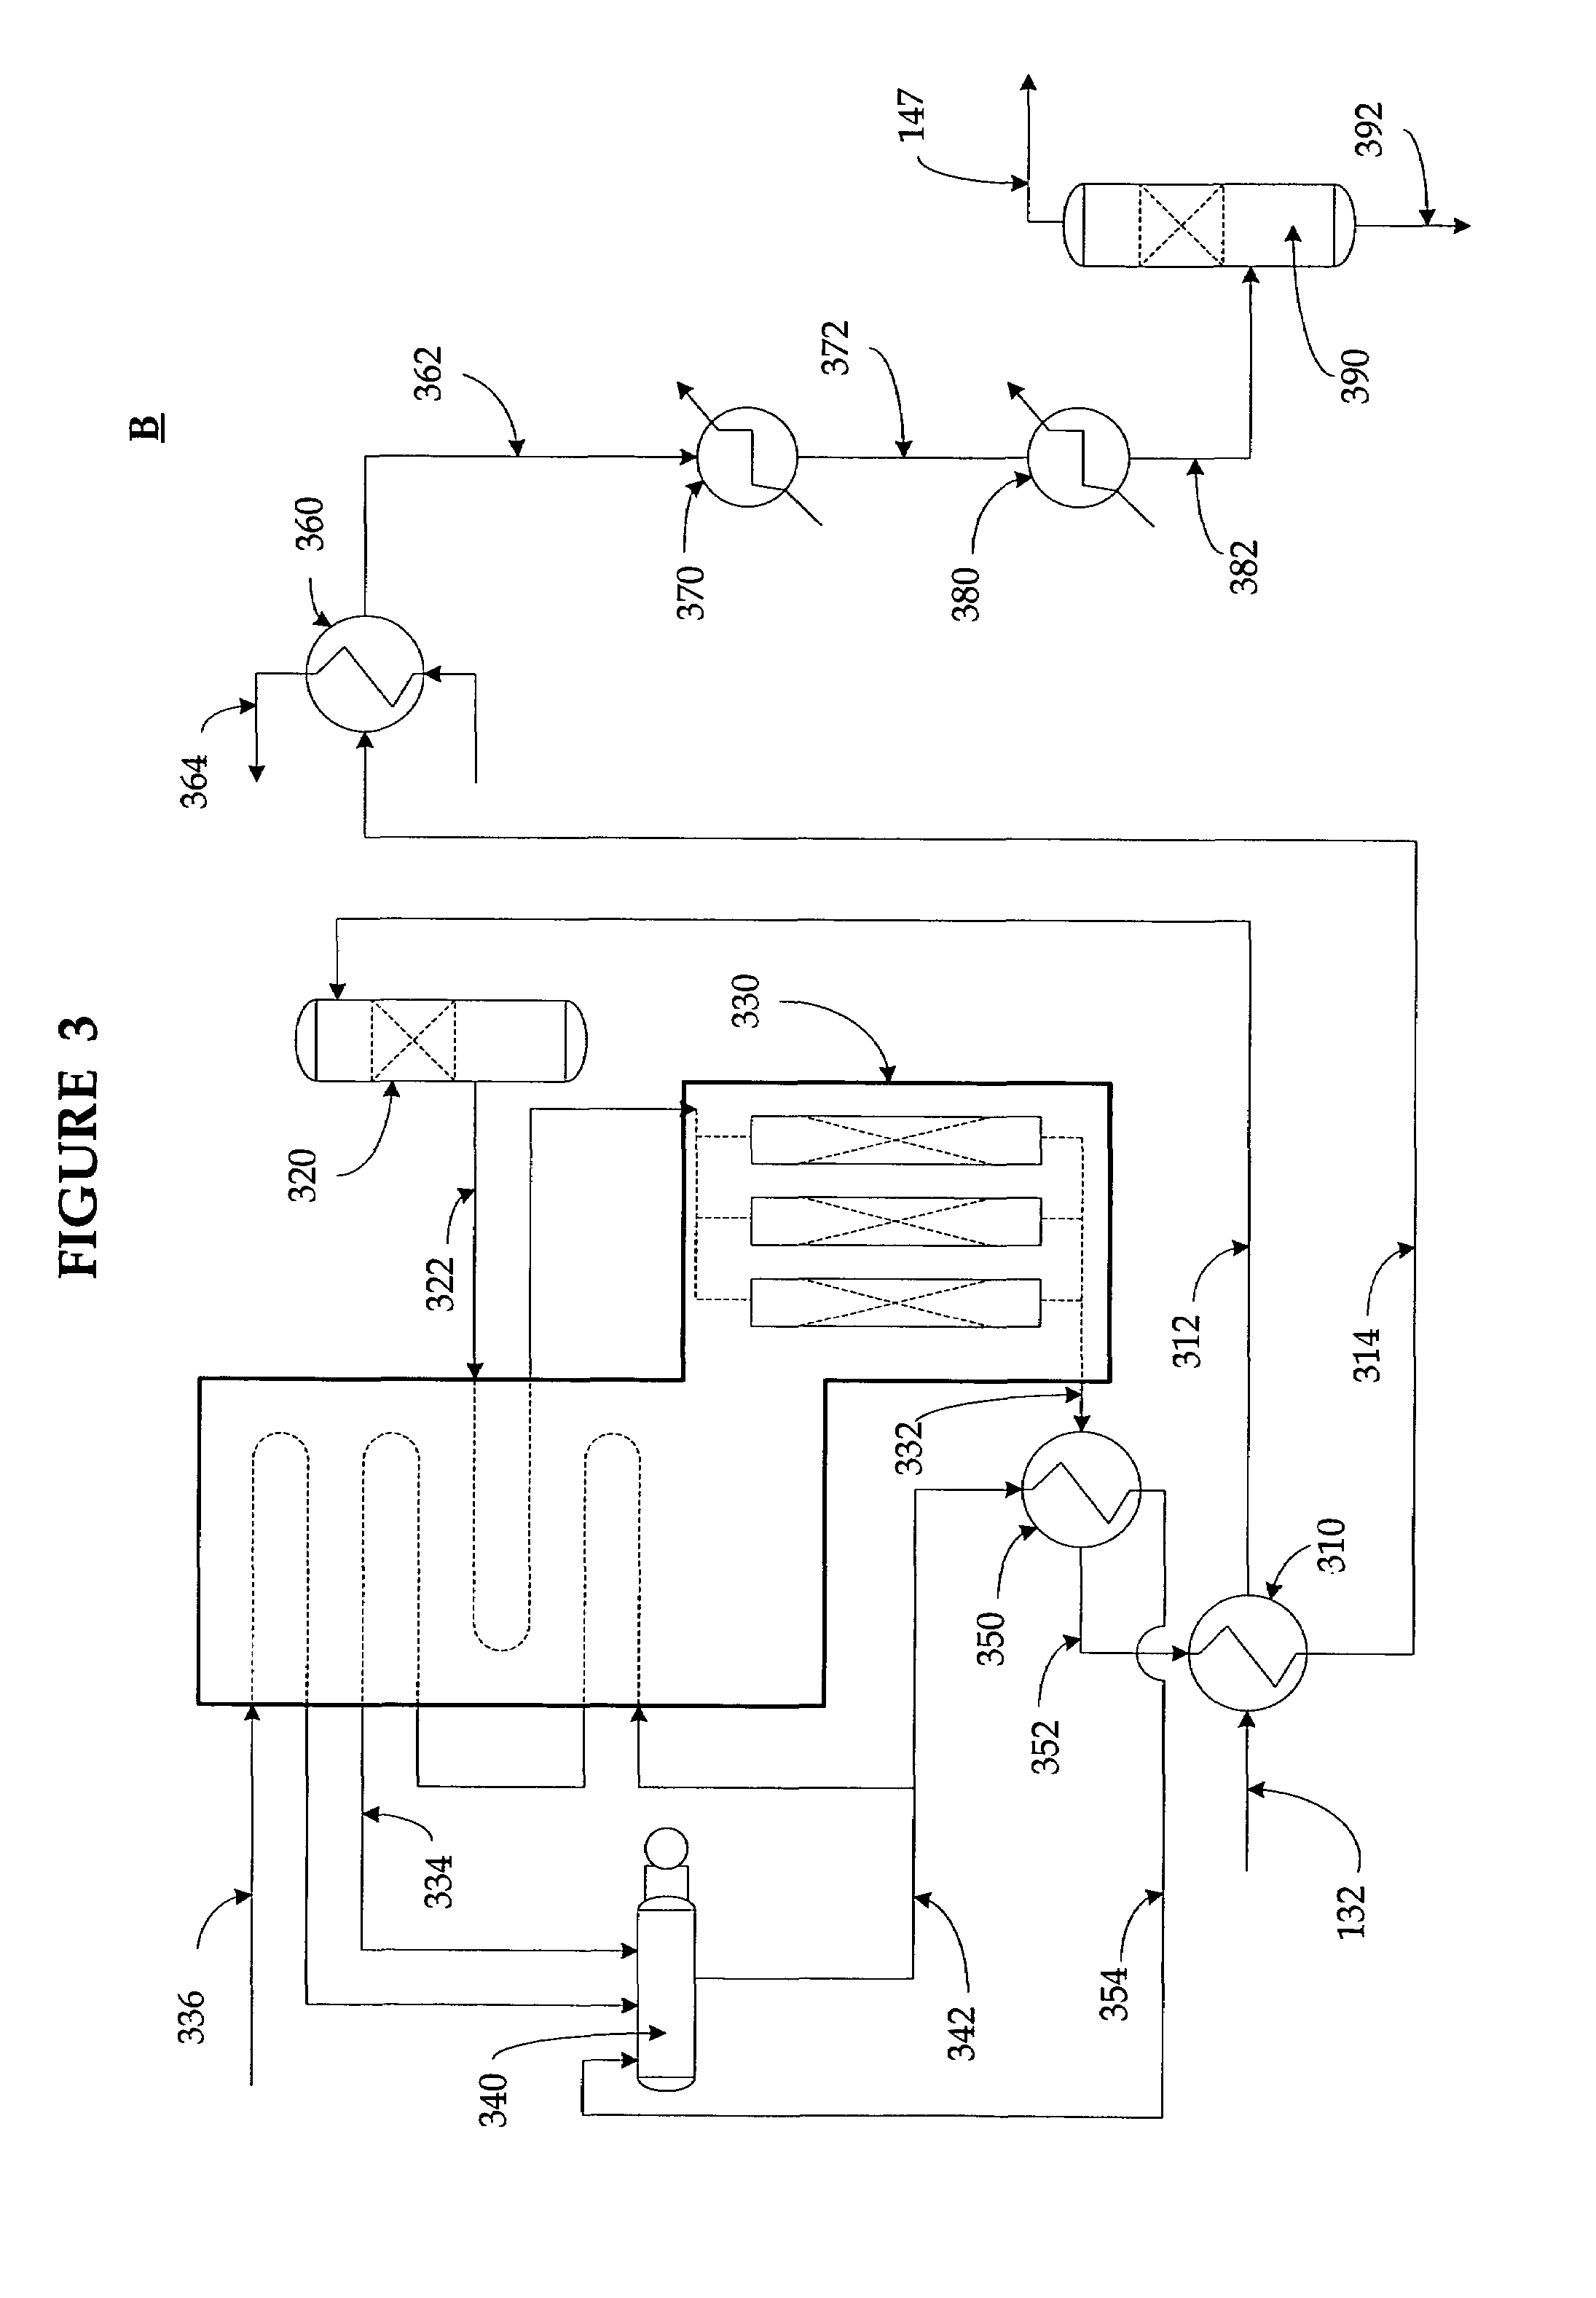 System and method for extracting energy from agricultural waste